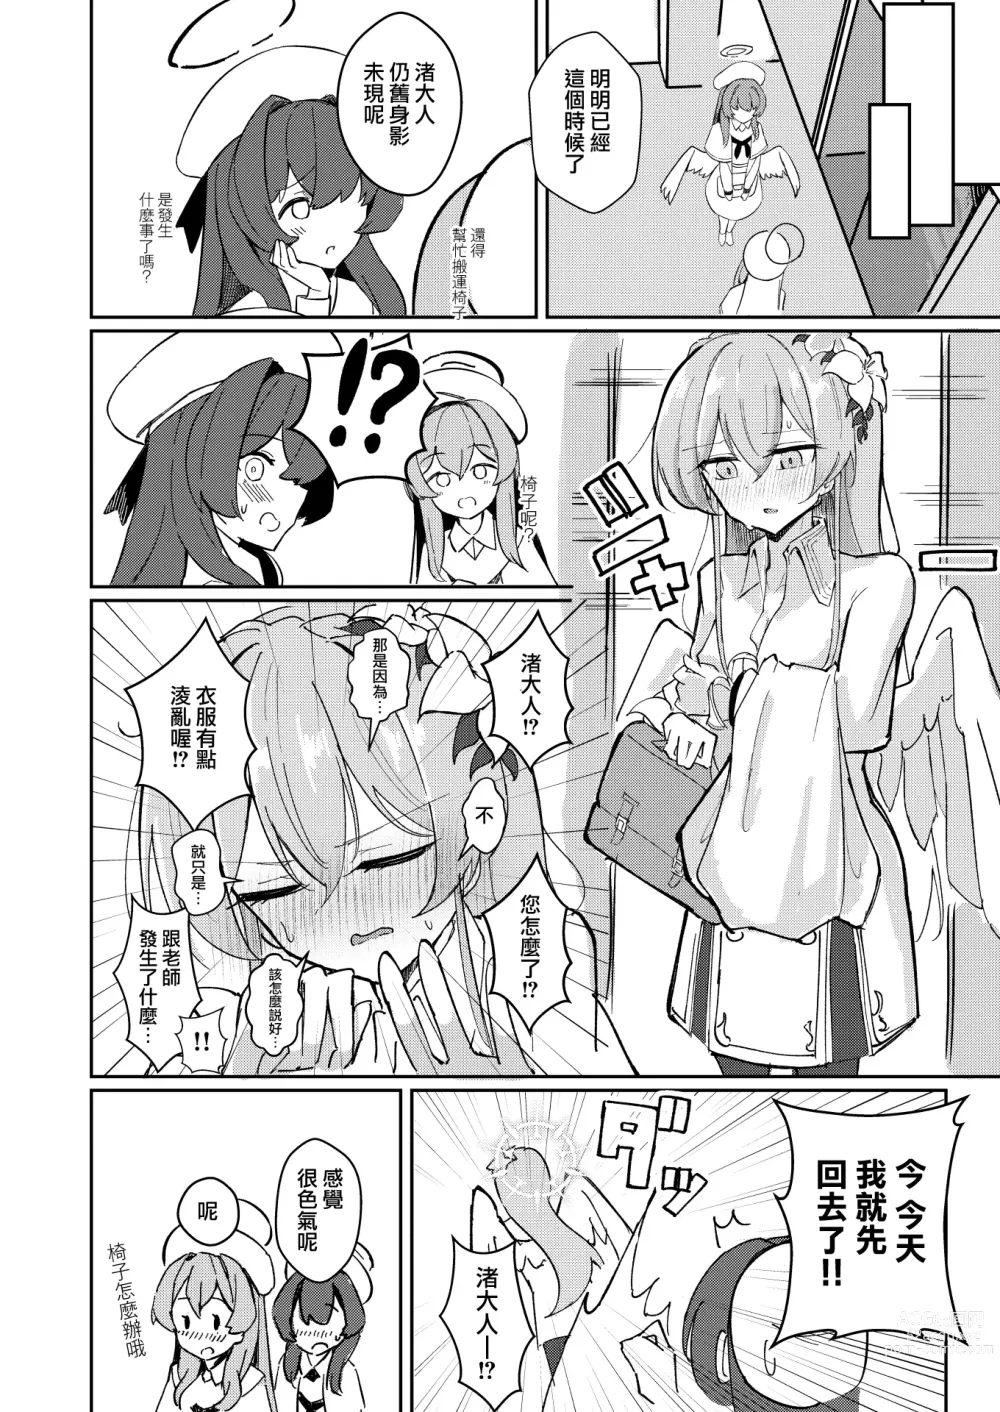 Page 9 of doujinshi 情欲羽翼下的學生會